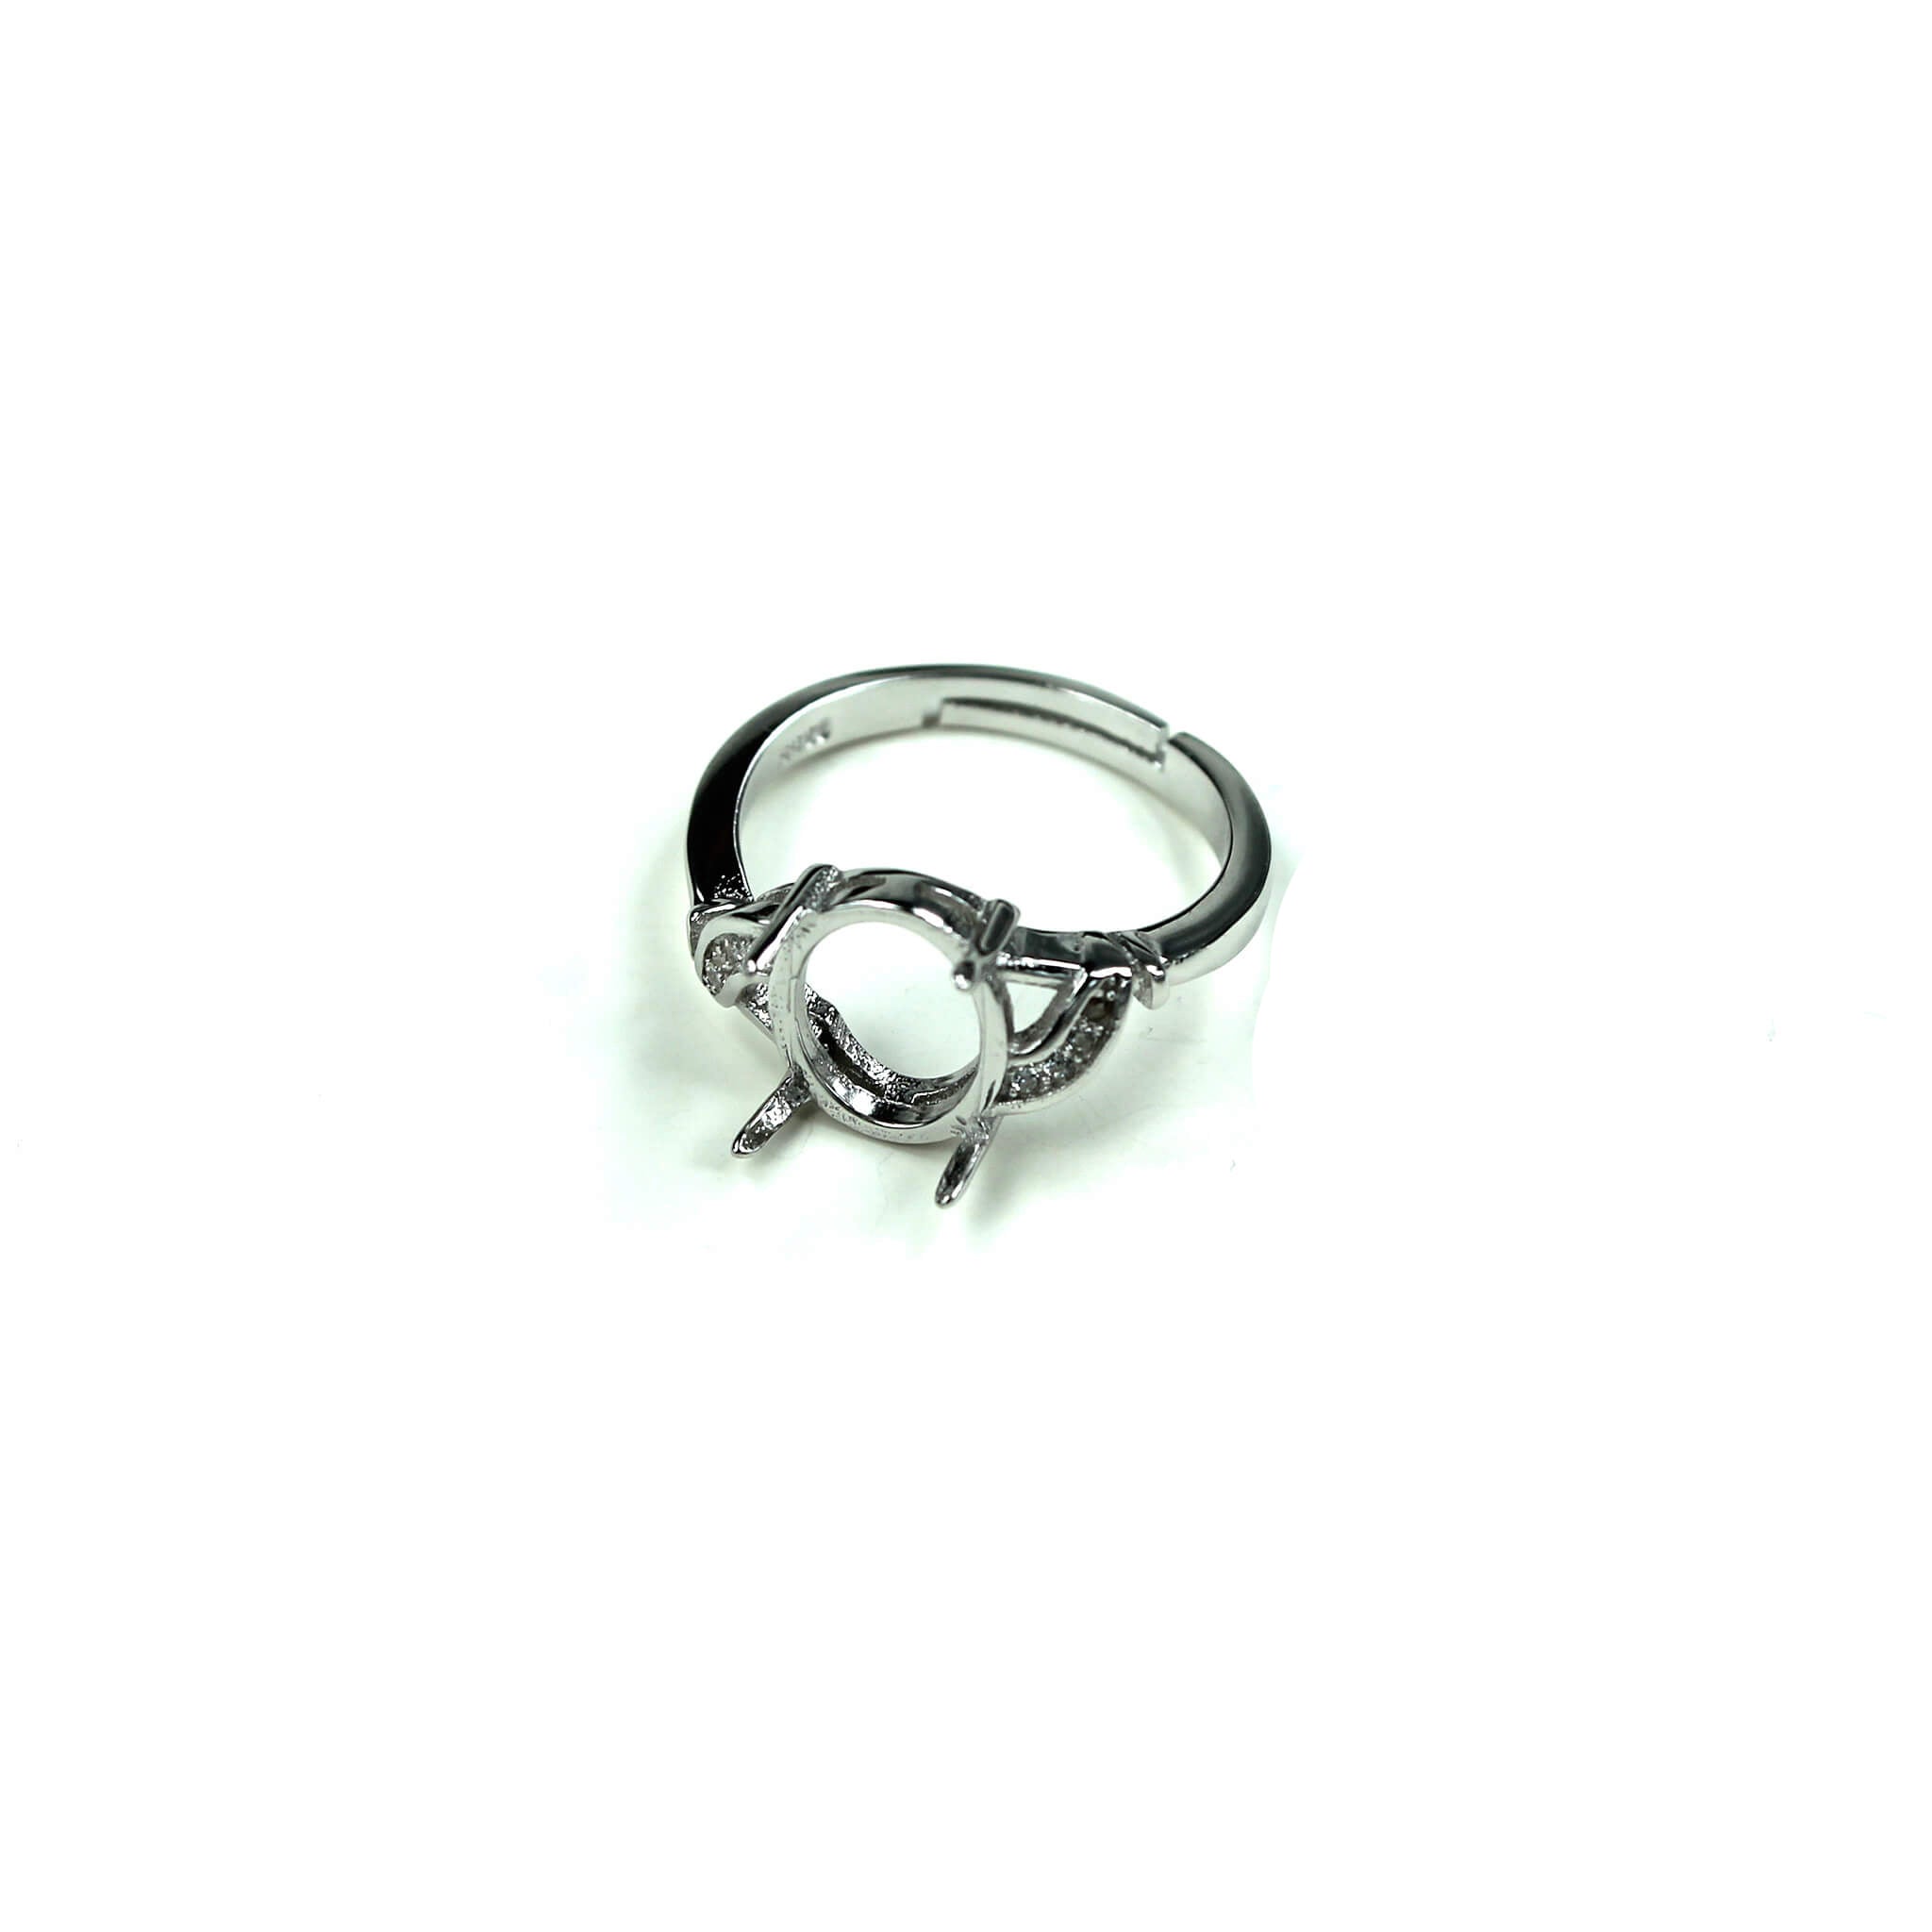 Curved Ring with Cubic Zirconia Inlays and Oval Prongs Mounting in Sterling Silver 8x9mm